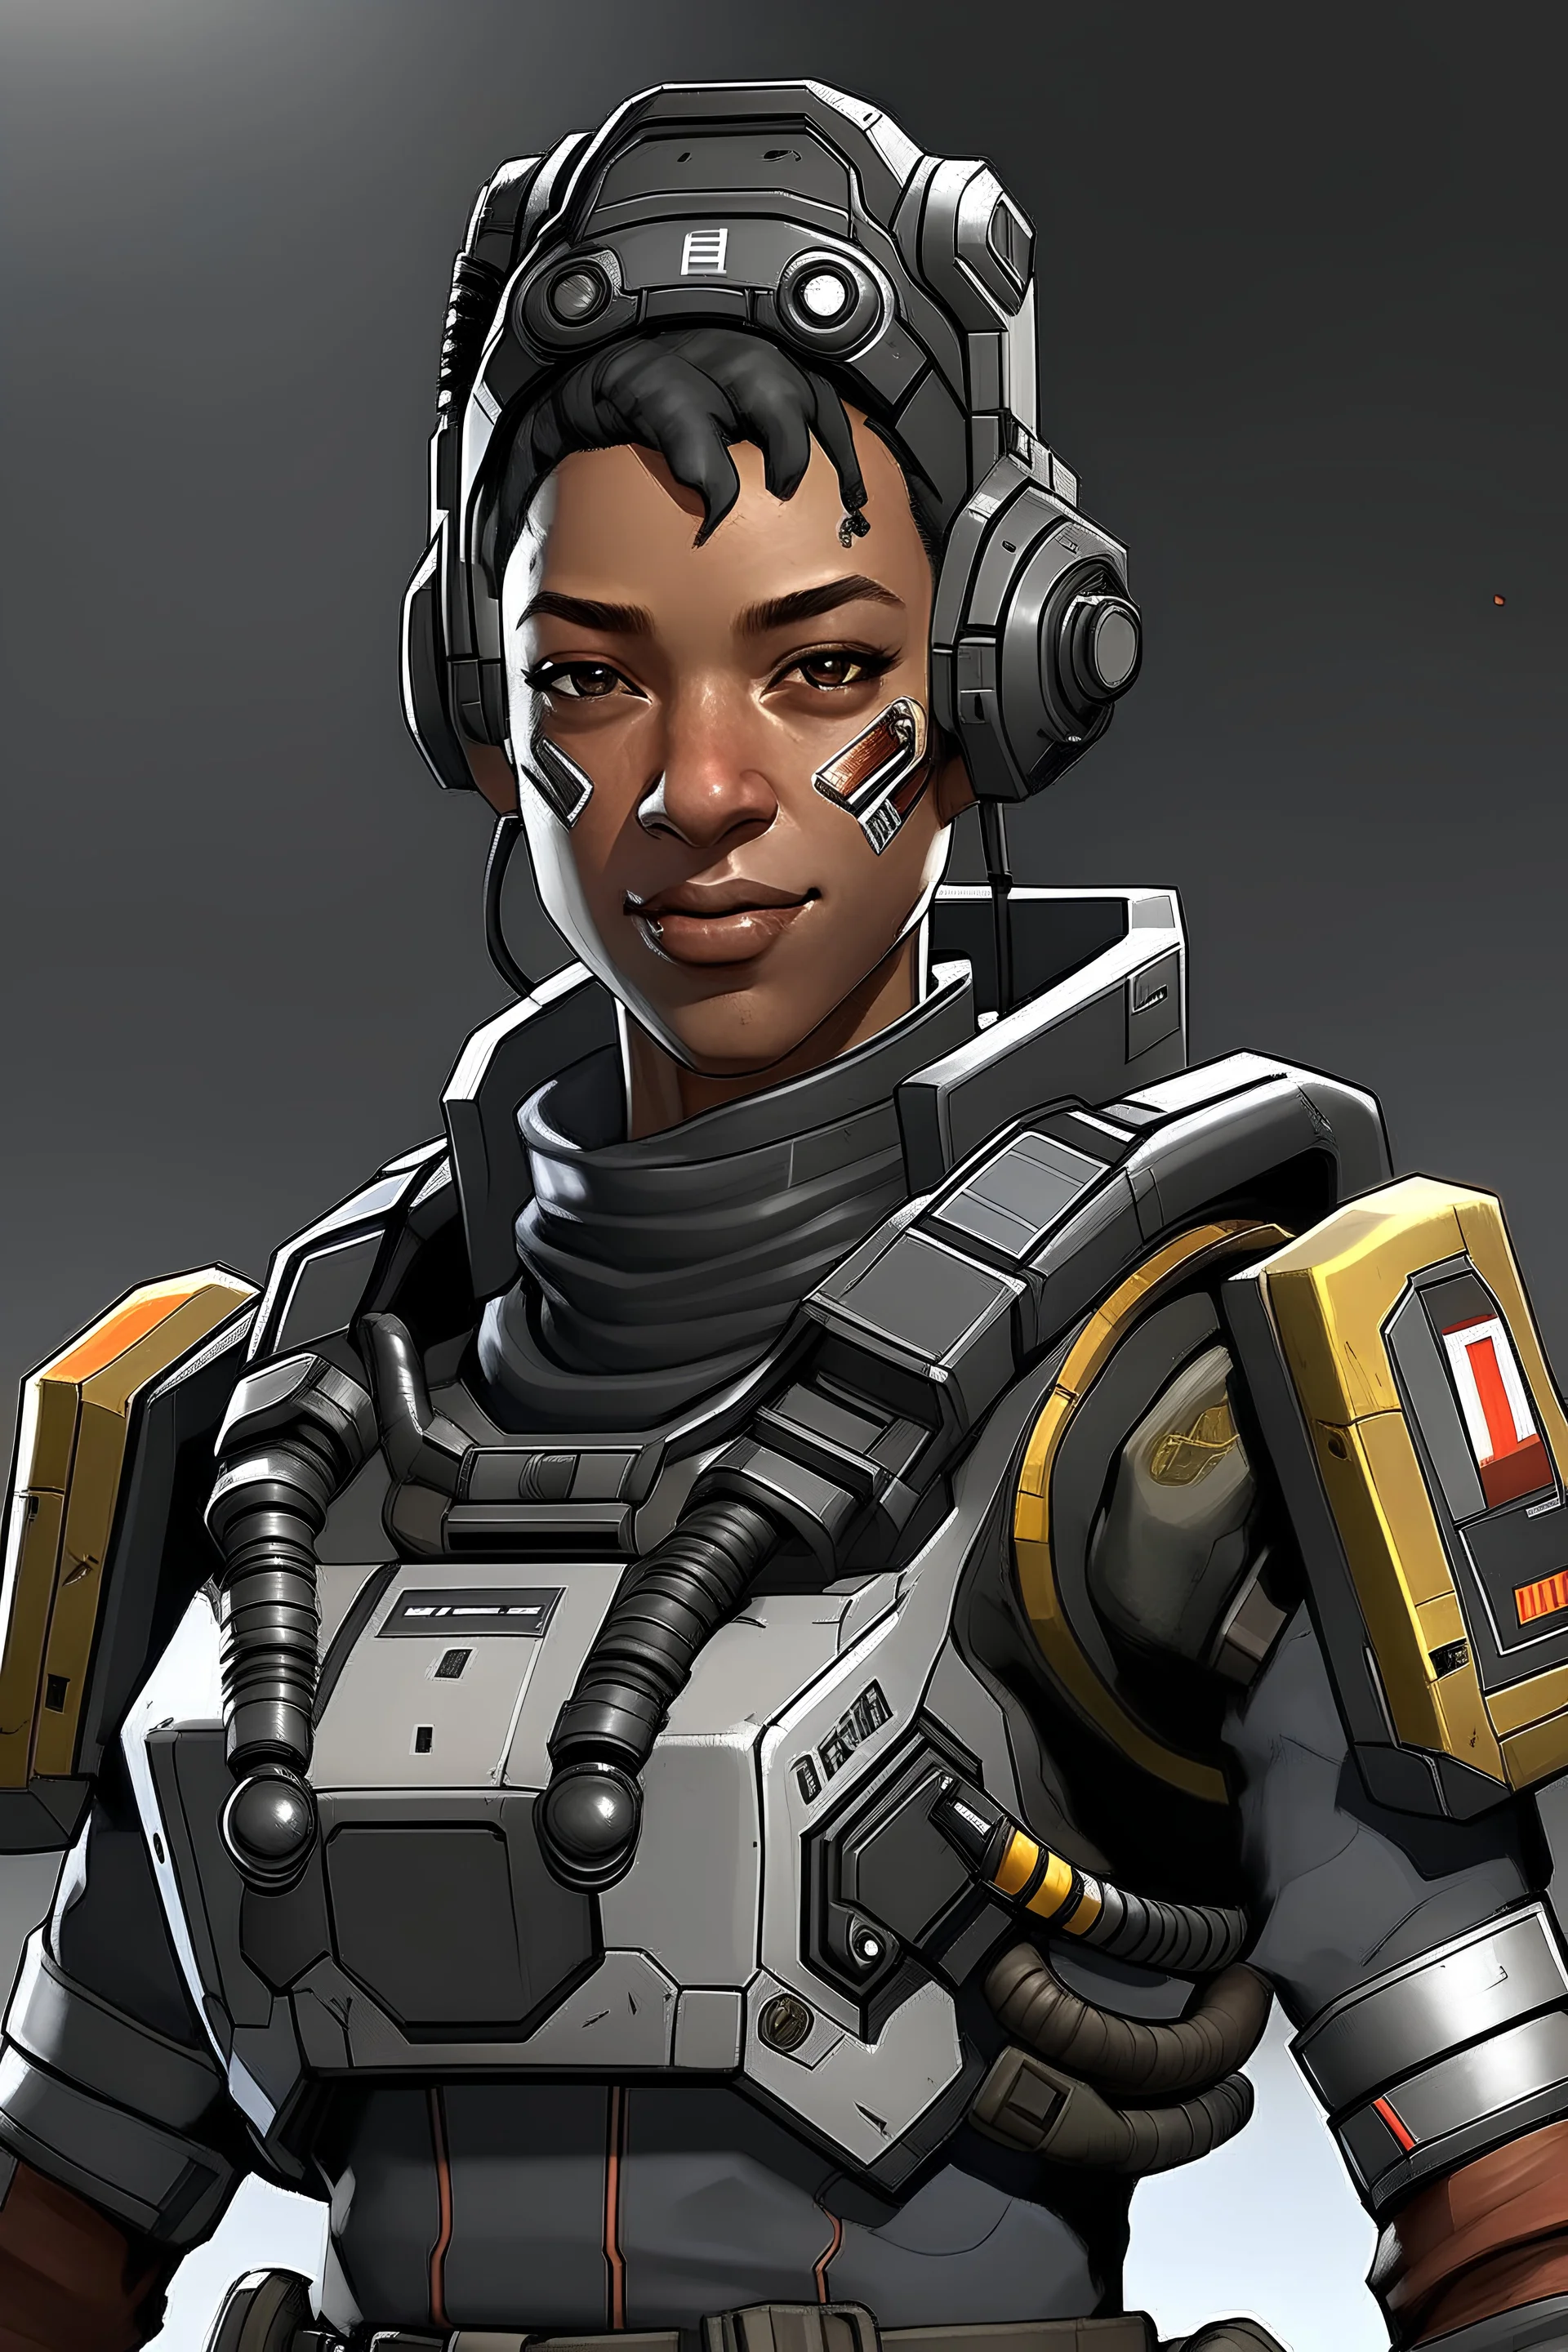 Catalyst from apex legends